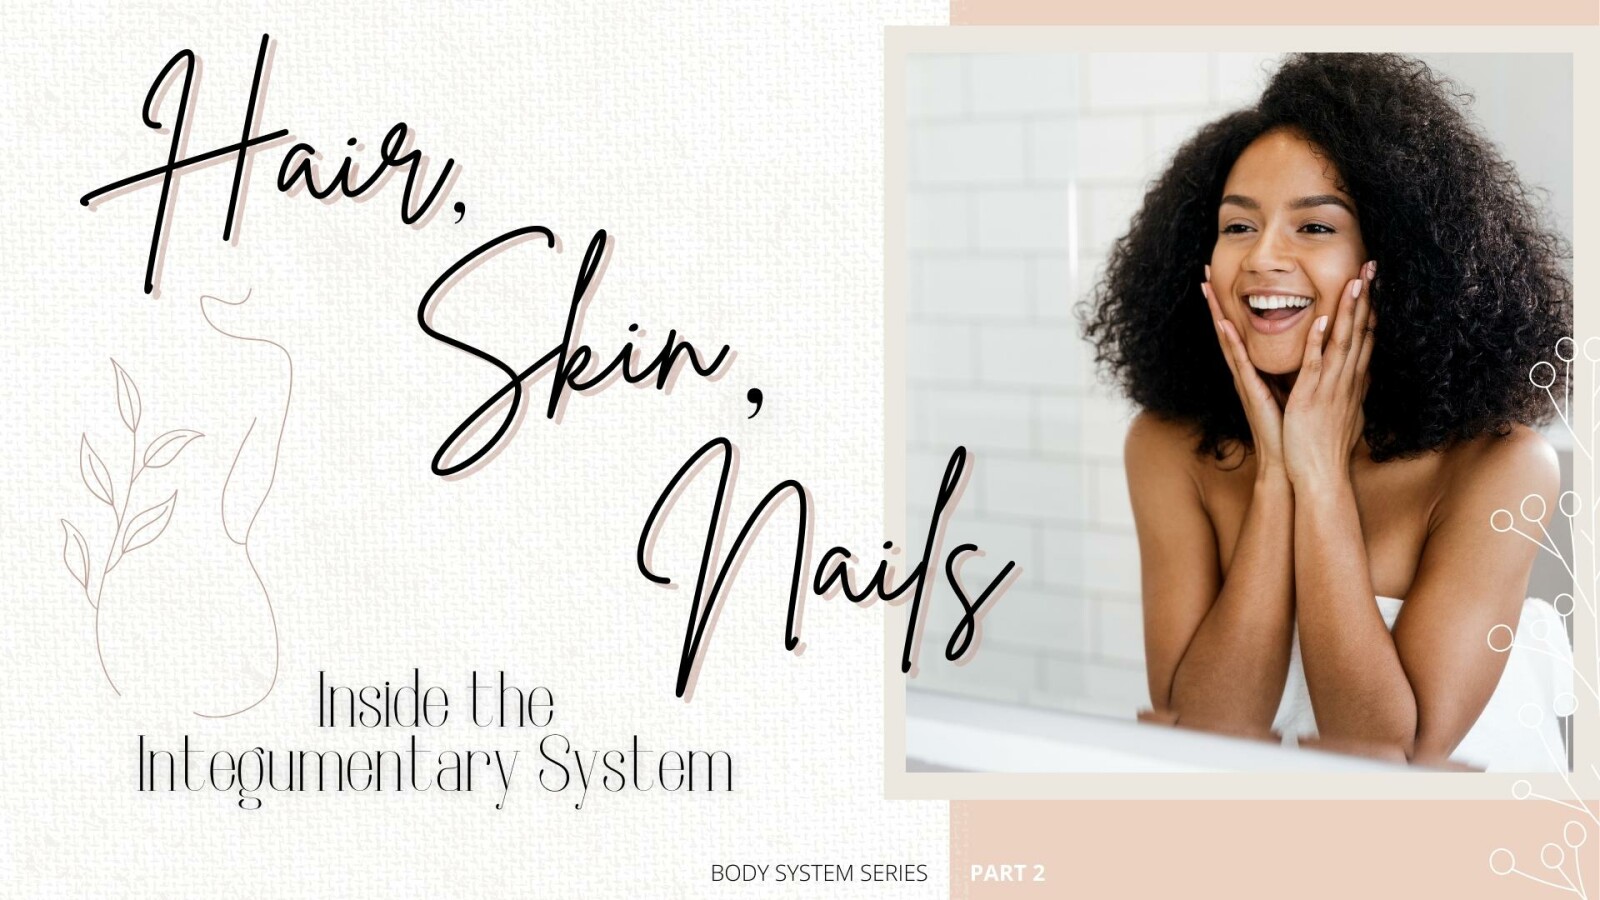  Hair, Skin, & Nails: Inside the Integumentary System 